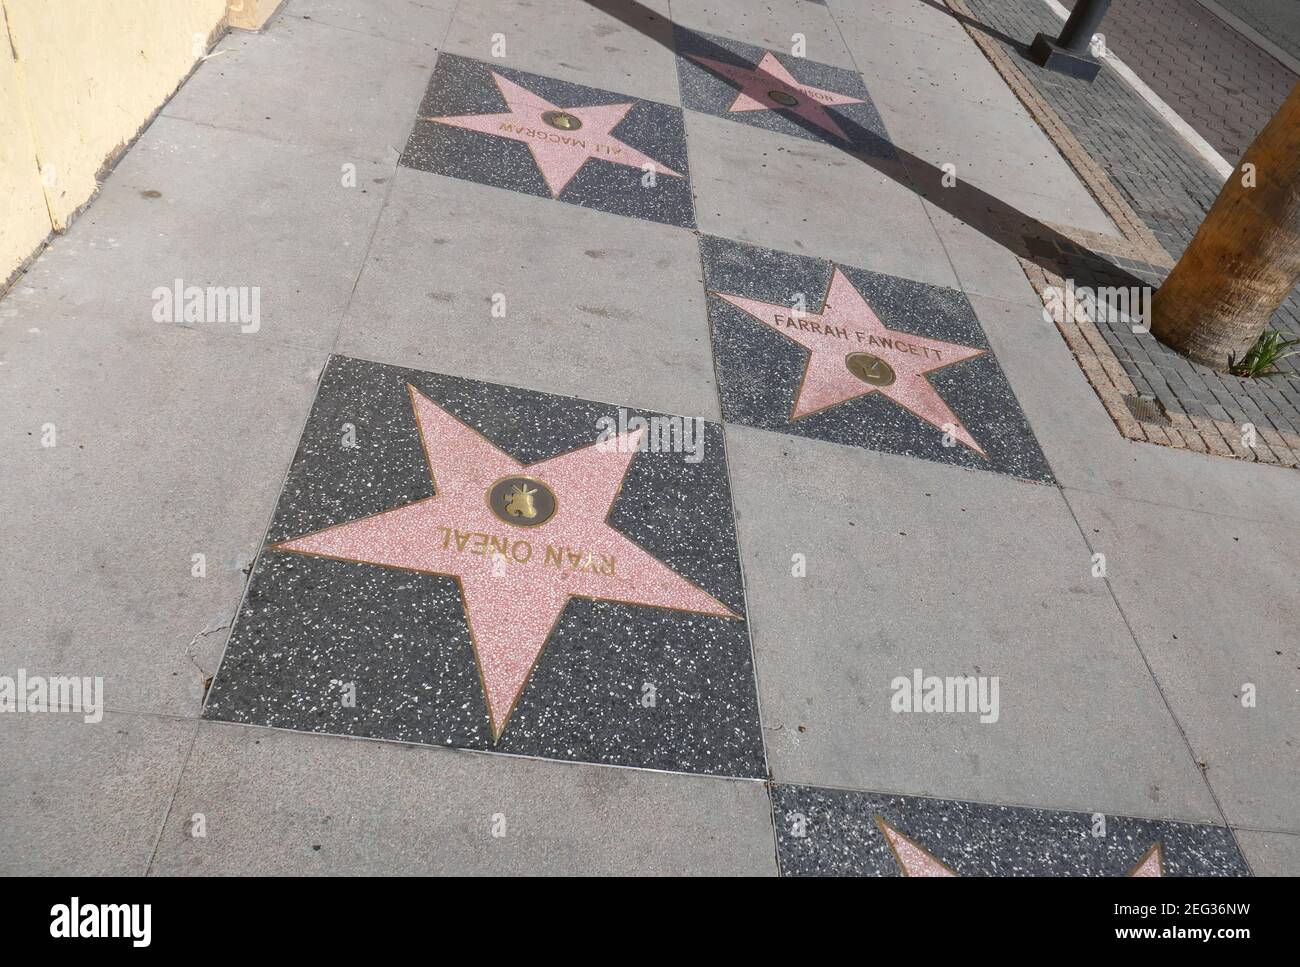 Hollywood, California, USA 17th February 2021 A general view of atmosphere of actress Ali MacGraw Star, actress Farrah Fawcett Star and actor Ryan O'Neal Star on Hollywood Walk of Fame on February 17, 2021 in Hollywood, California, USA. Photo by Barry King/Alamy Stock Photo Stock Photo